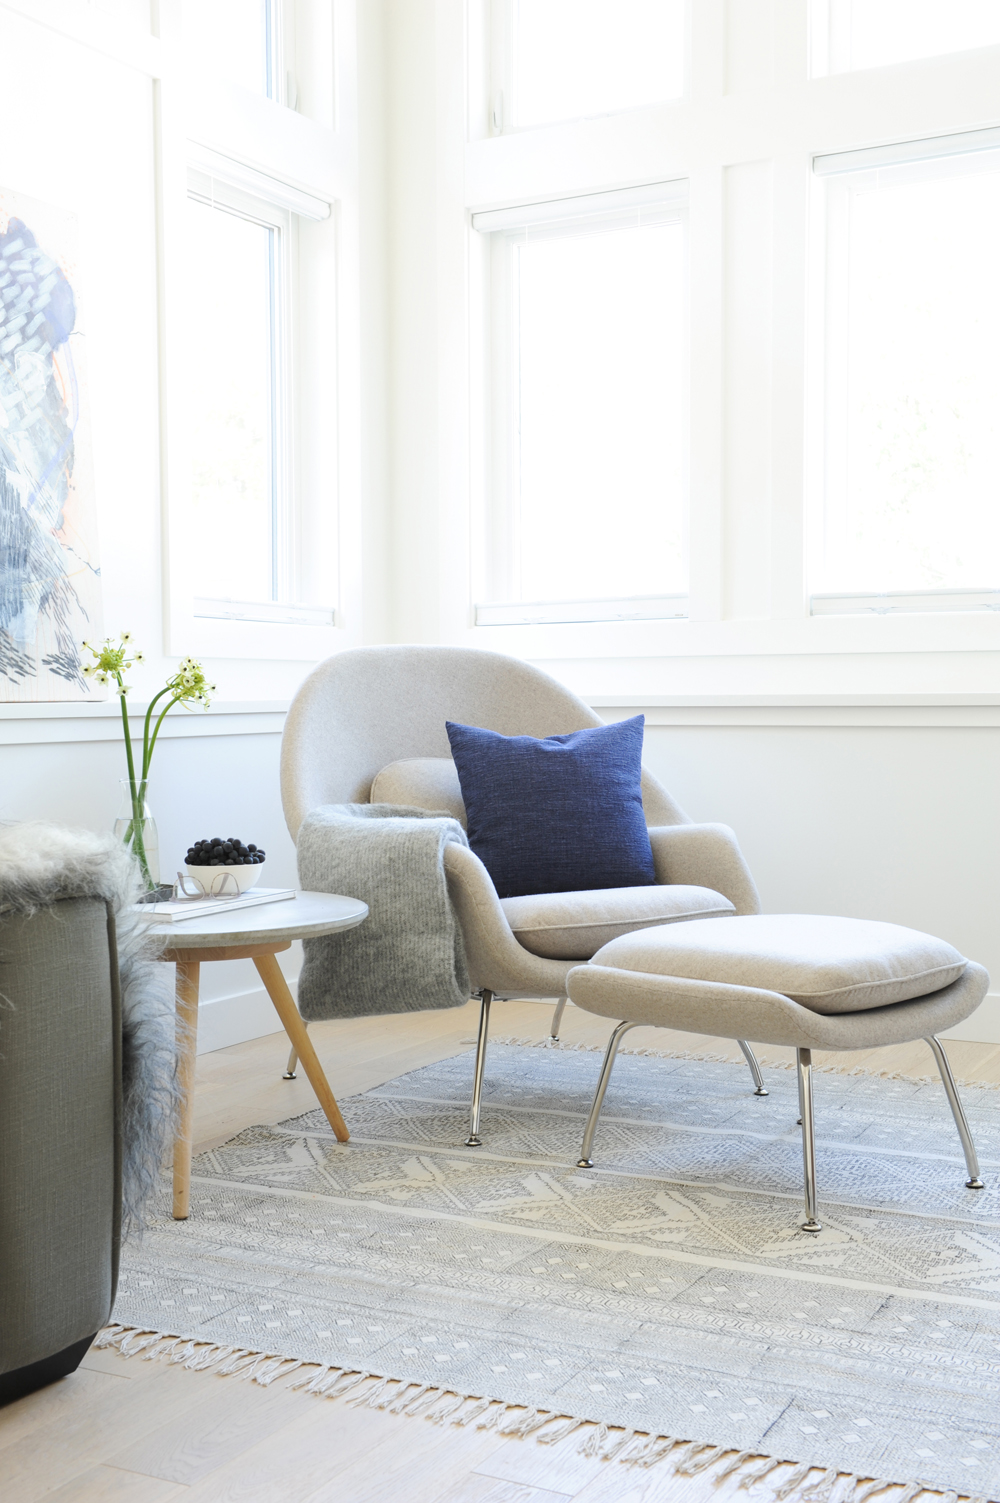 beige chair with matching stool, throw and blue cushion in windowed entry